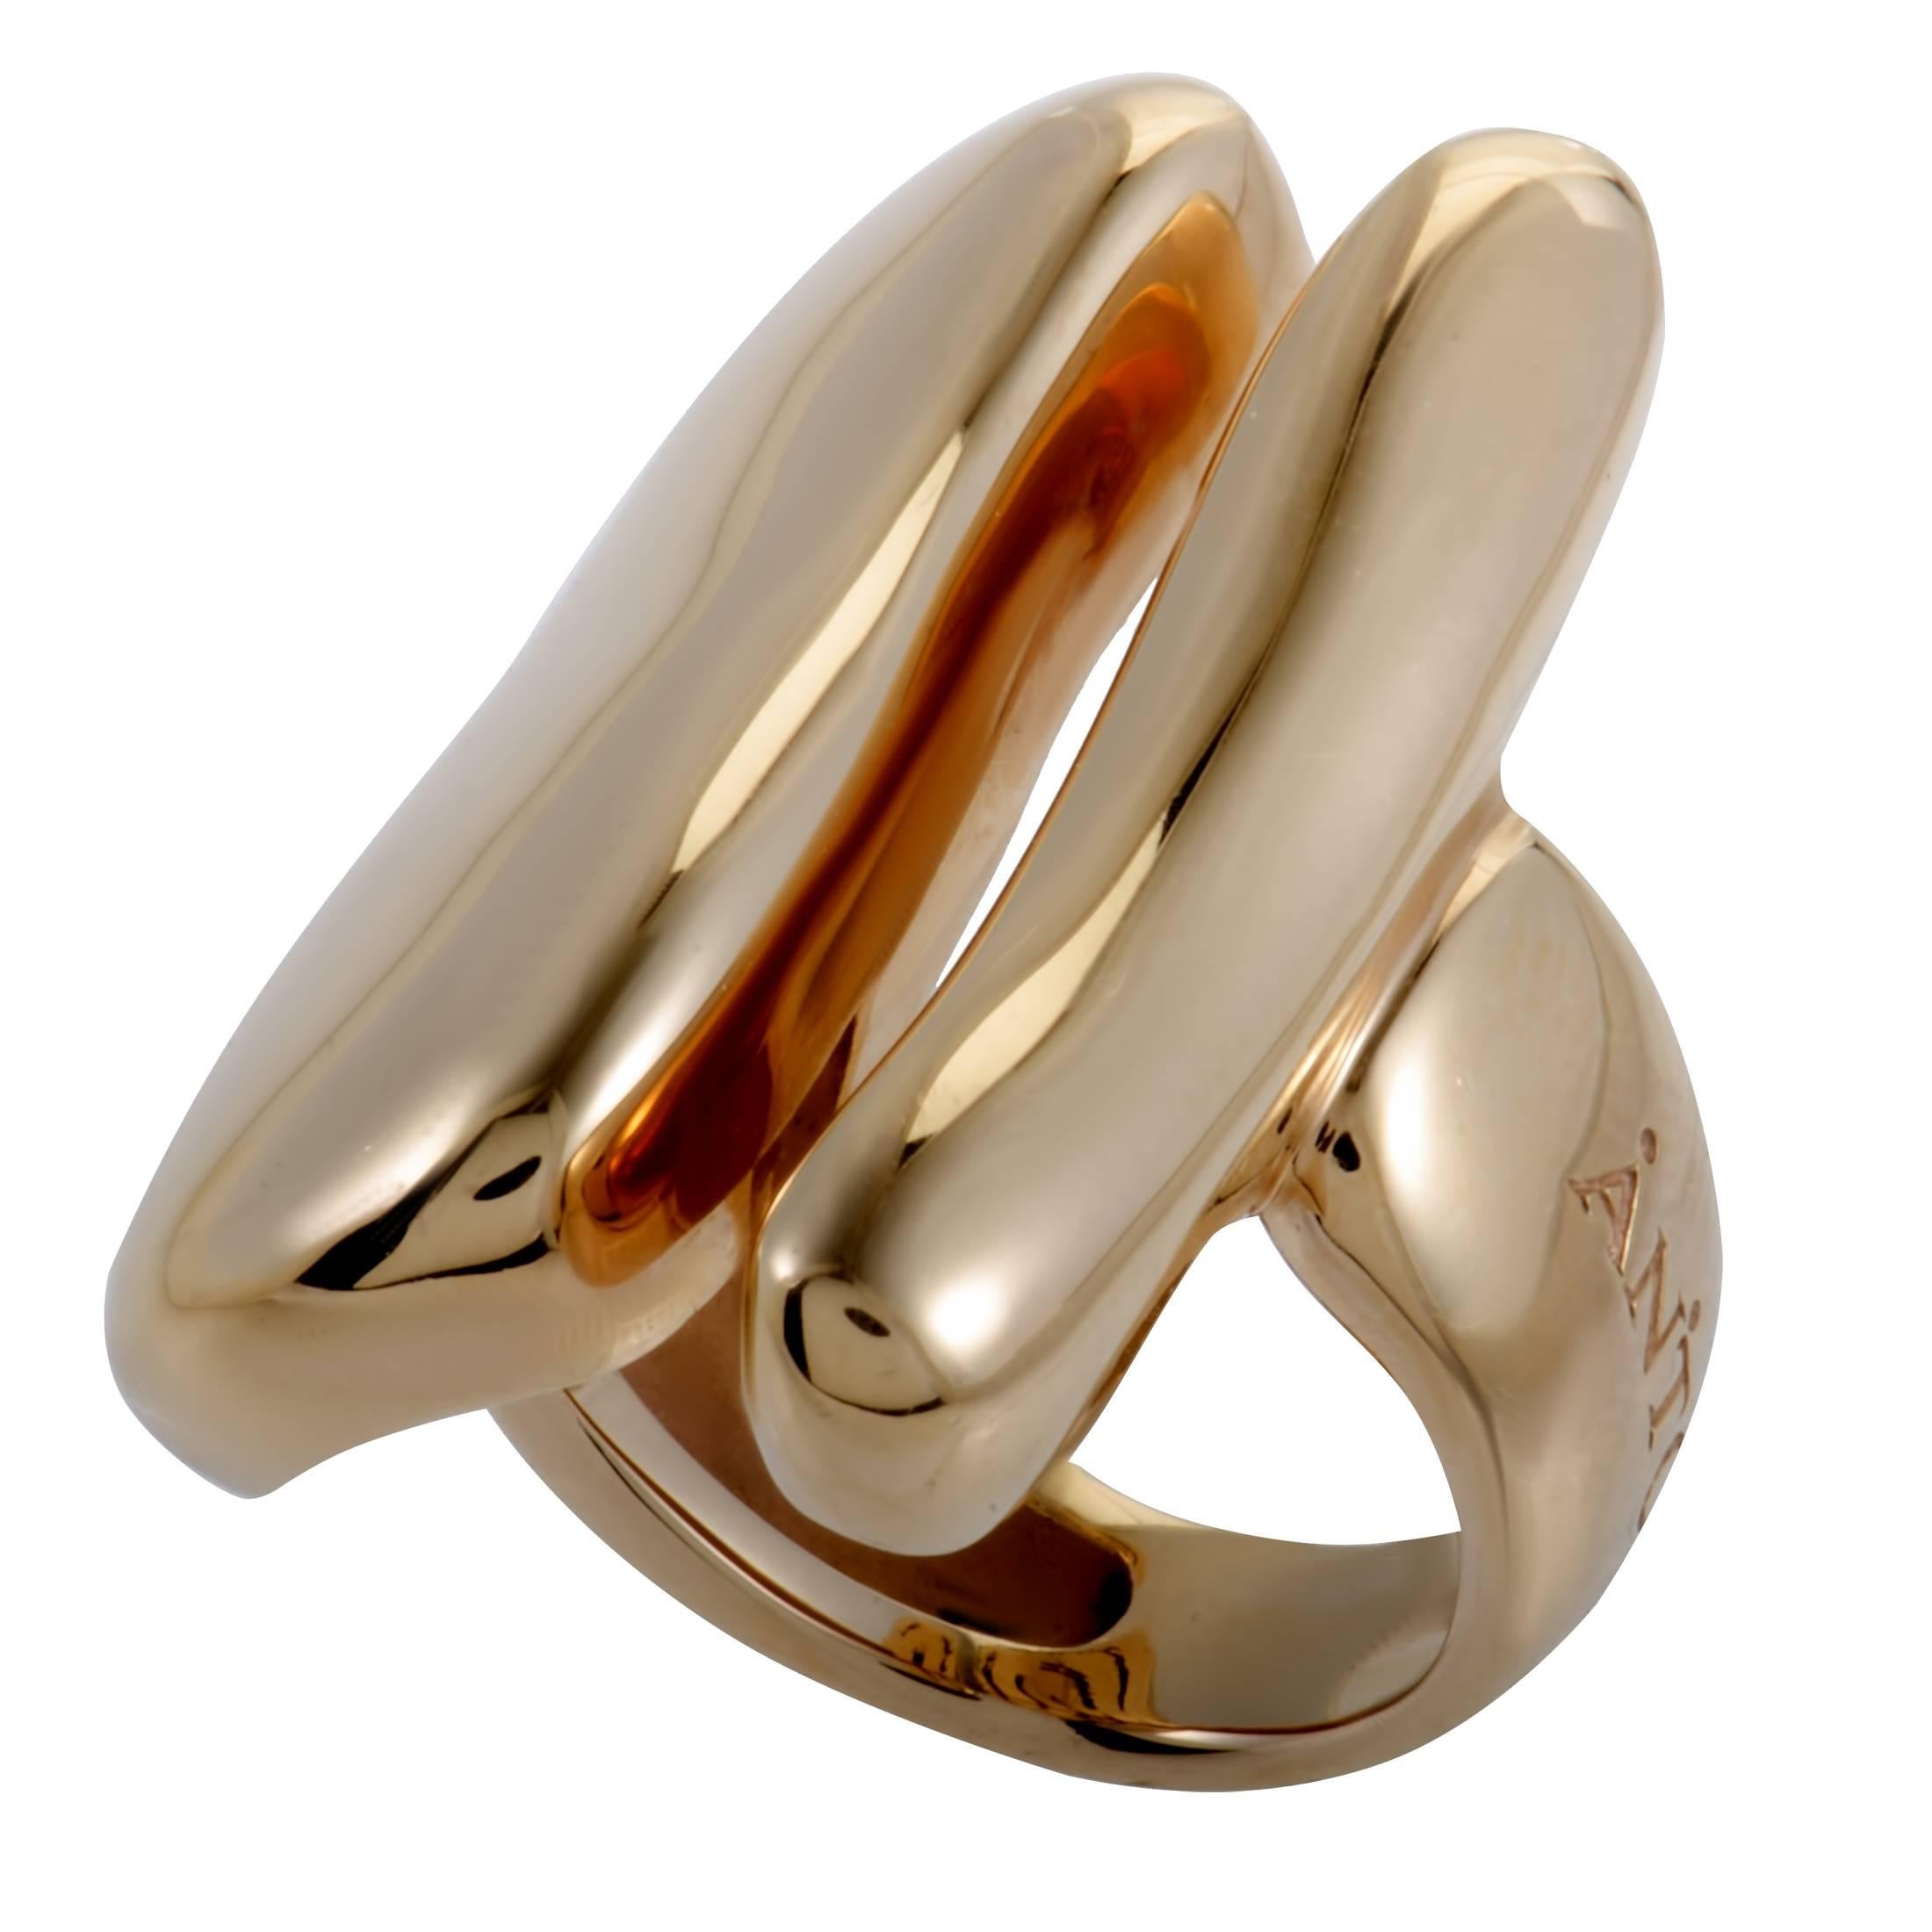 The gorgeous shape of this ring adds to its exclusivity, while the alluring sheen of 18K rose gold makes it a standout piece. The ring is presented by Antonini and weighs 18.9 grams.
Ring Size: 4.75
Ring Top Dimensions: 28mm x 17mm
Band Thickness: